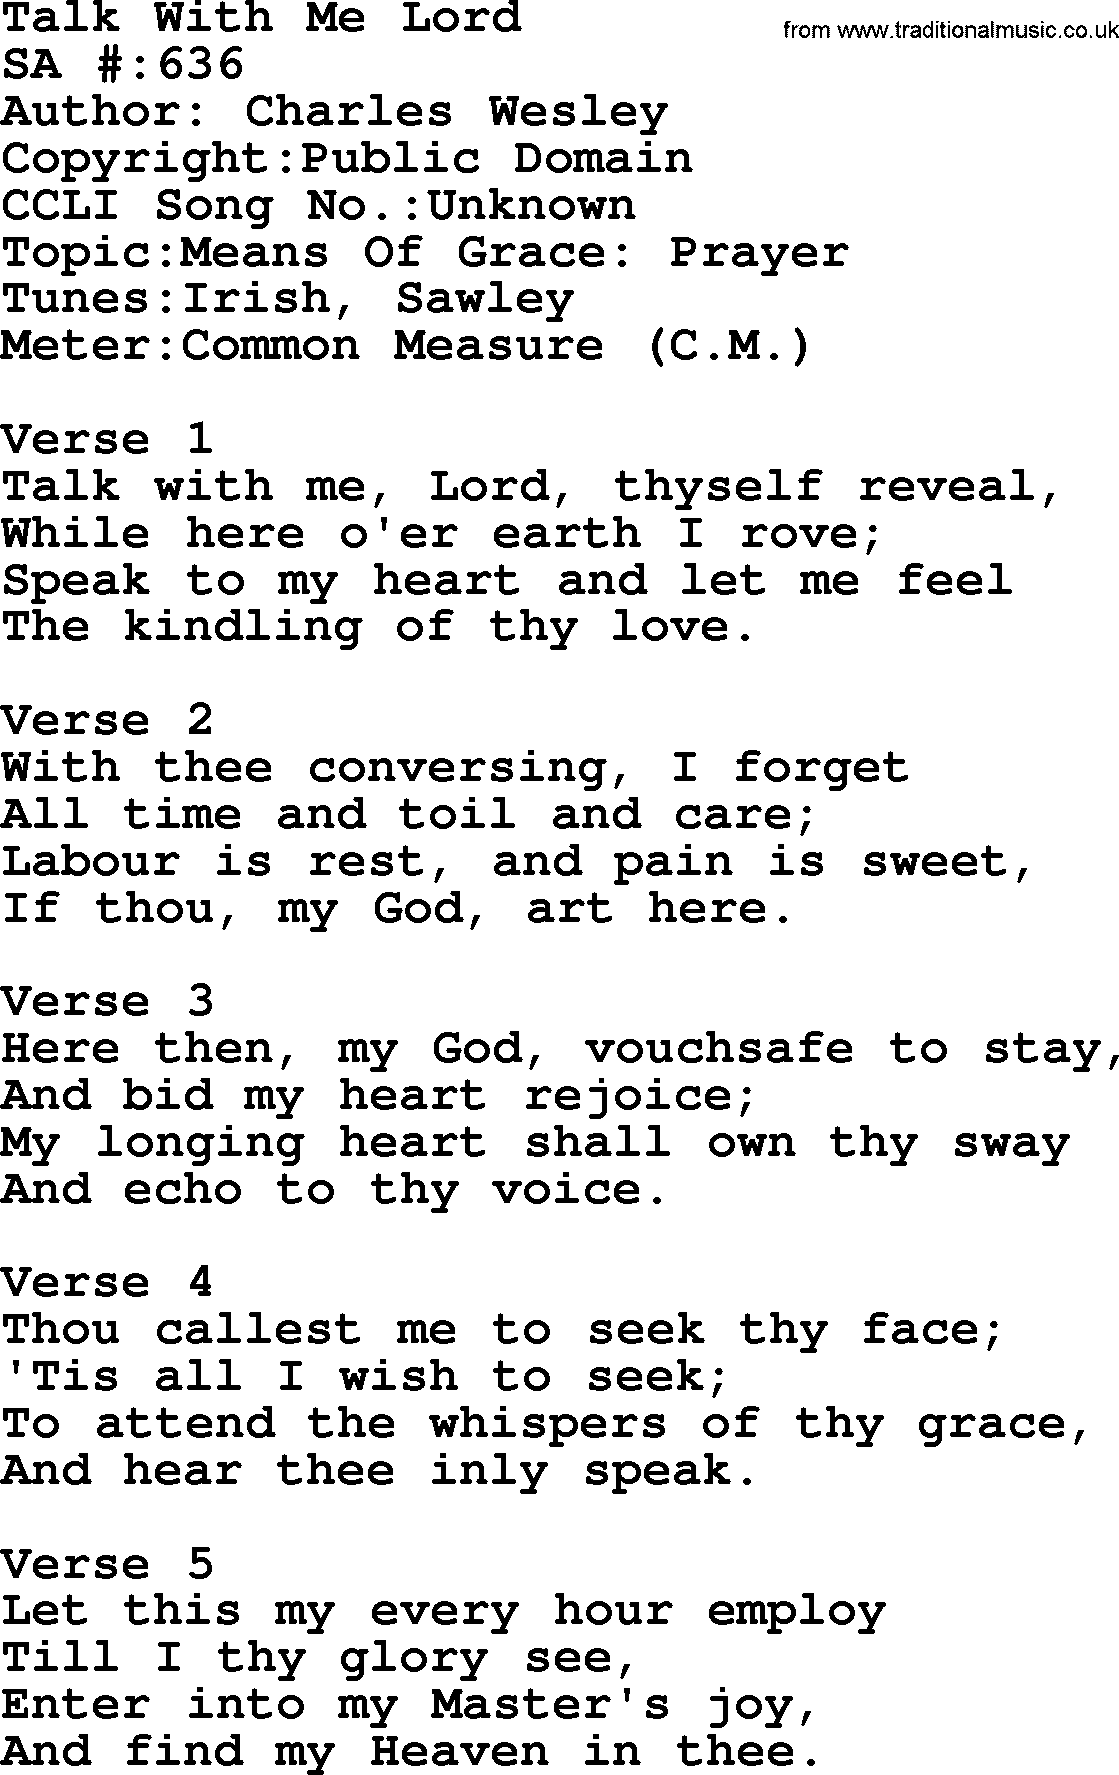 Salvation Army Hymnal, title: Talk With Me Lord, with lyrics and PDF,